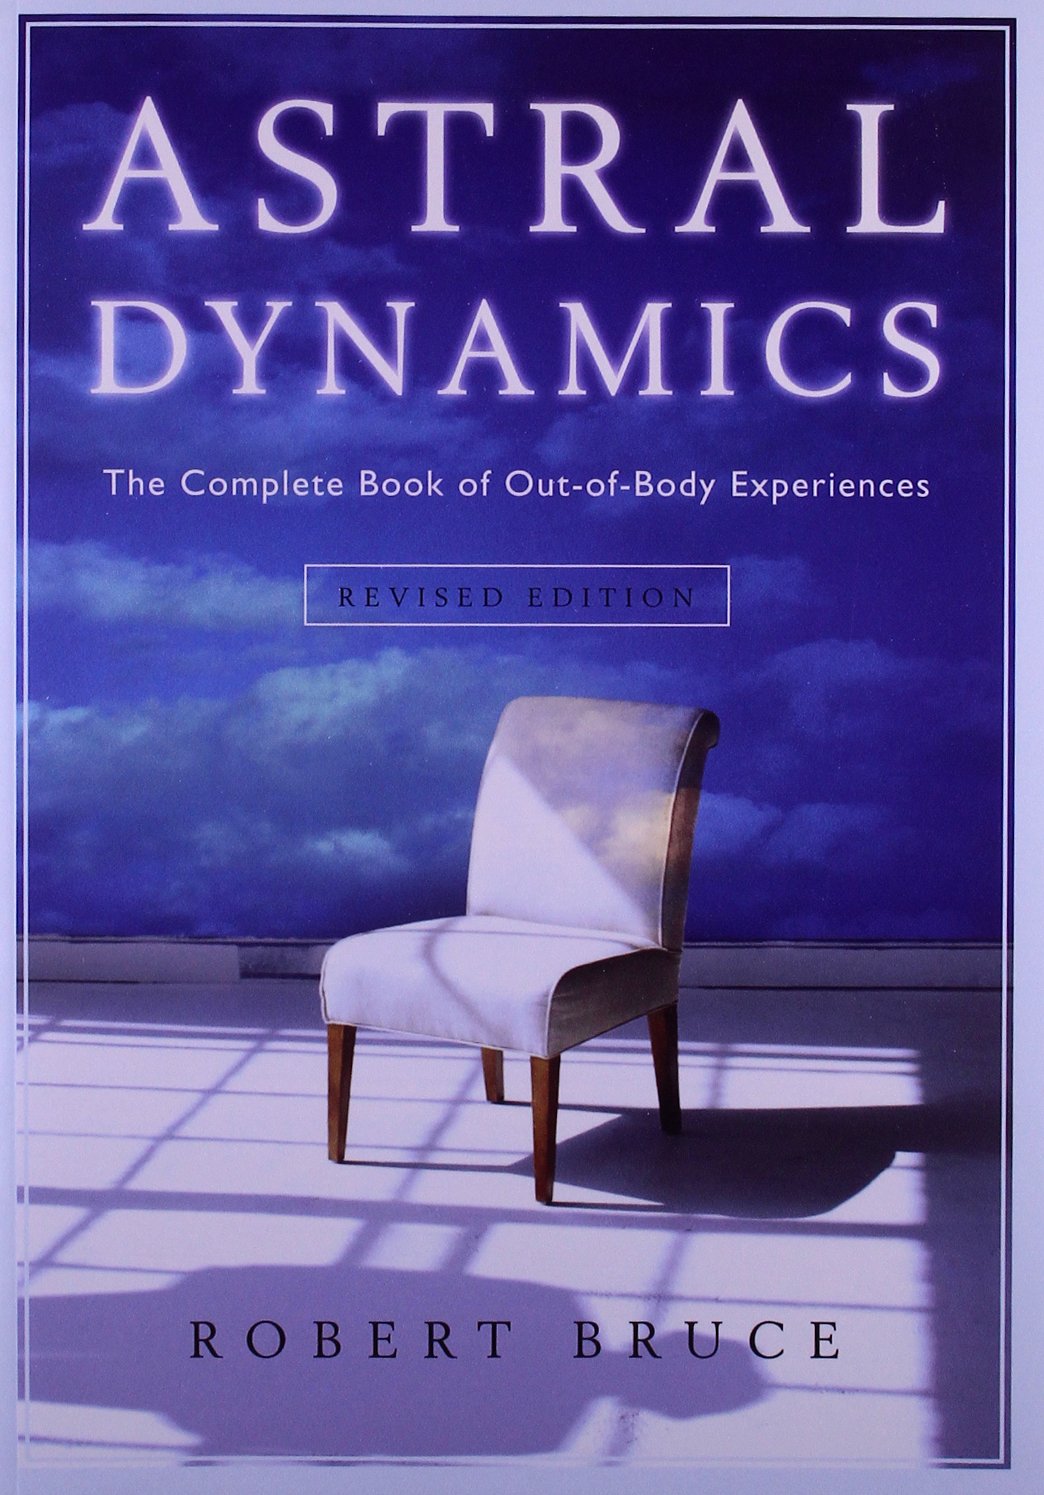 best astral projection book